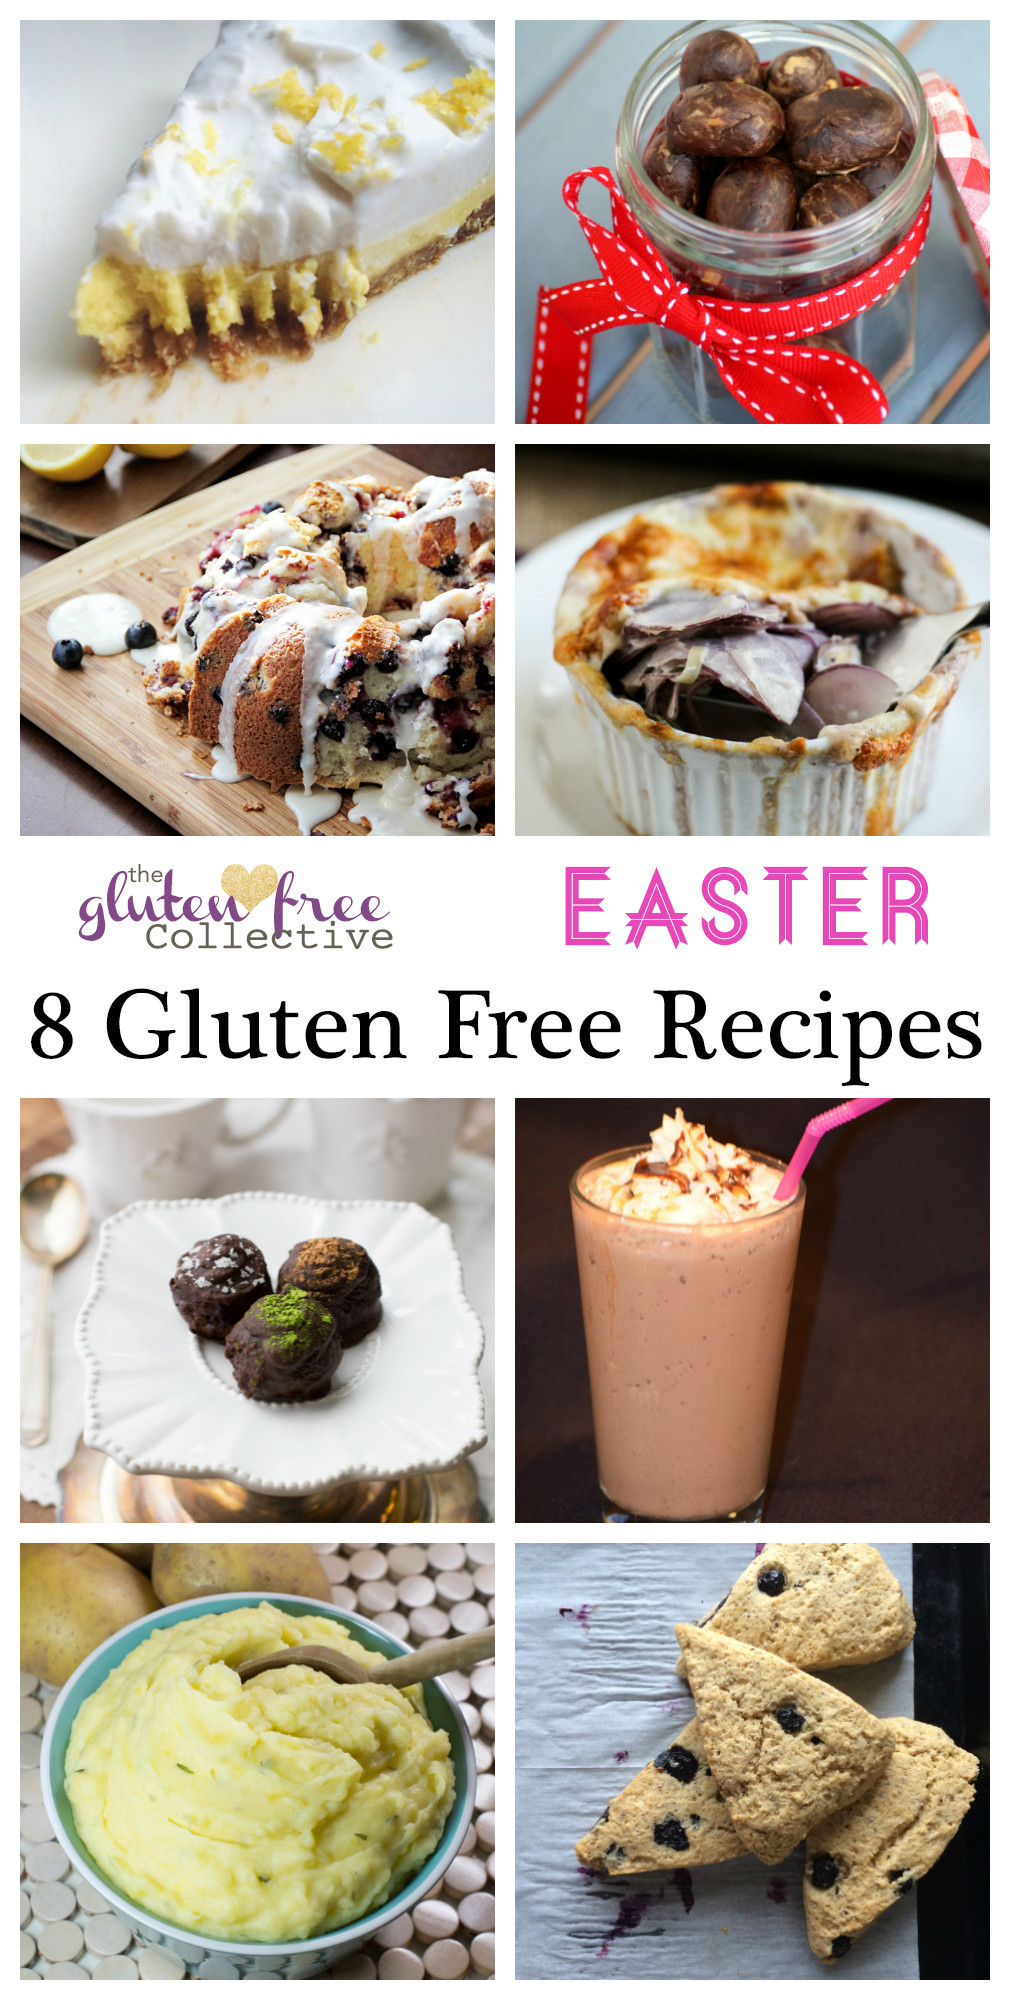 Gluten Free Easter Recipes
 8 Gluten Free Recipes For EASTER The Gluten Free